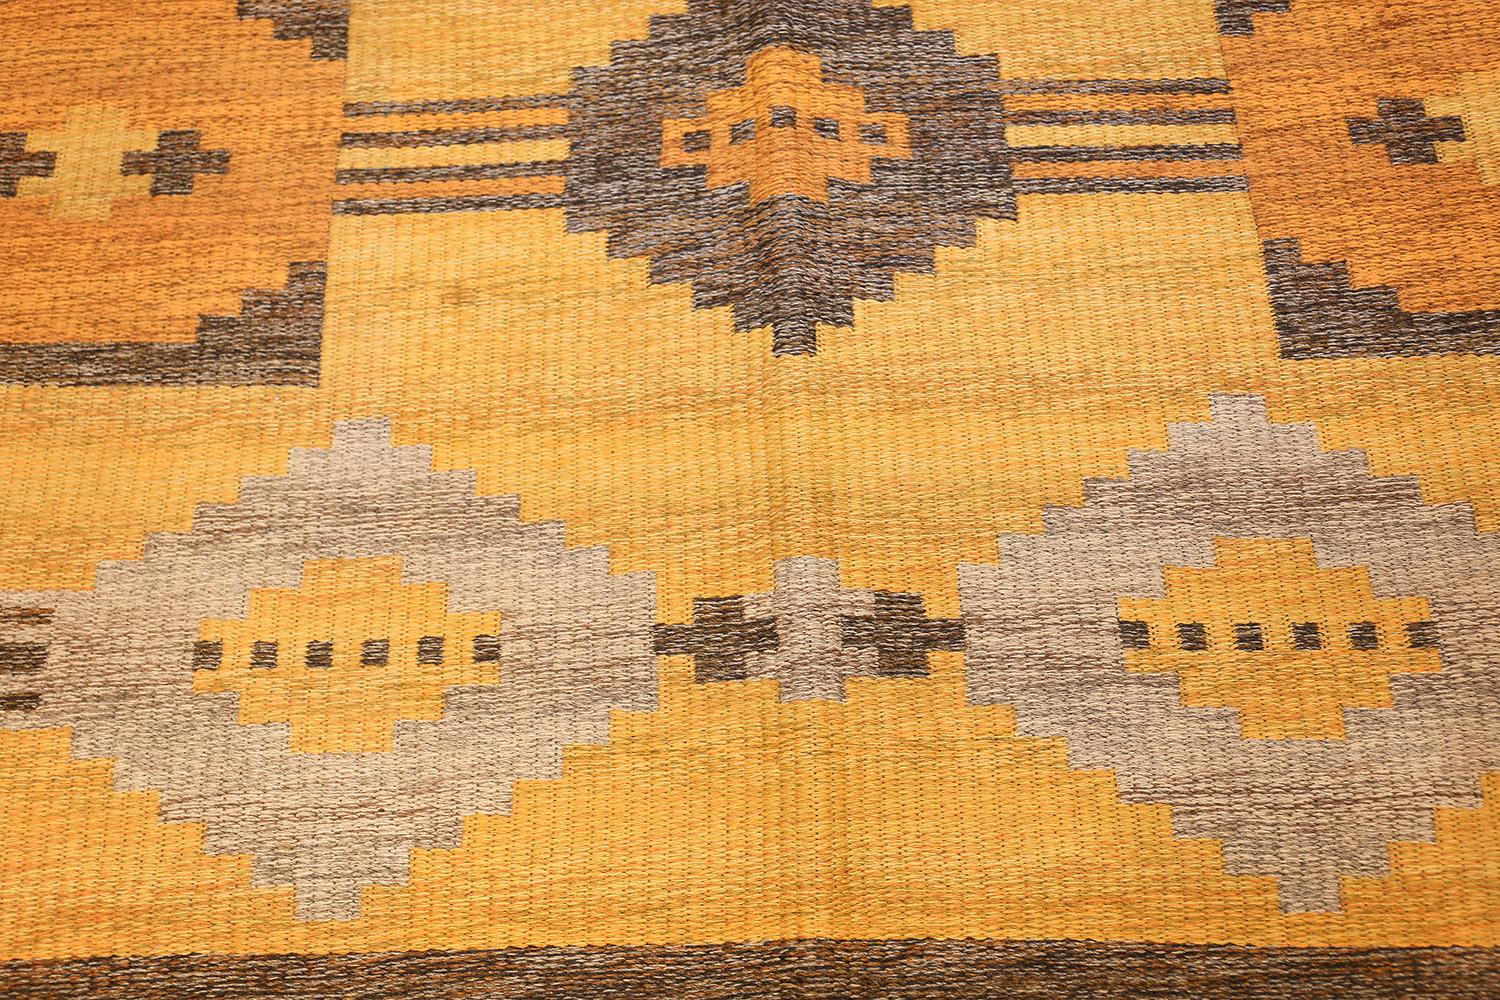 Vintage Double-Sided Swedish Kilim Rug. Size: 5 ft x 7 ft 8 in (1.52 m x 2.34 m) 2